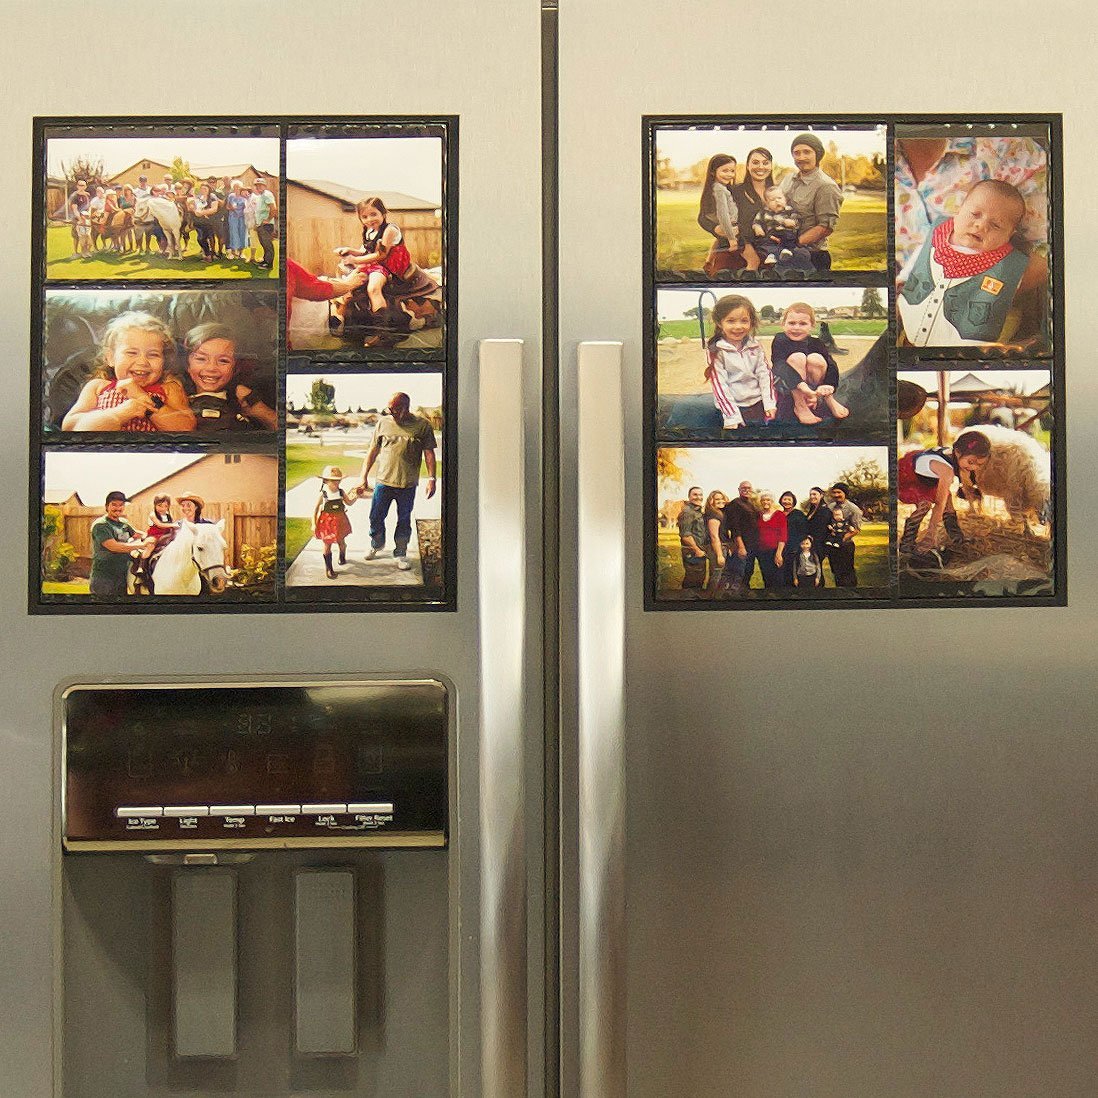 Brilliant idea to help your kitchen look a lot neater when you're decluttering - a magnetic collage picture frame for your refrigerator